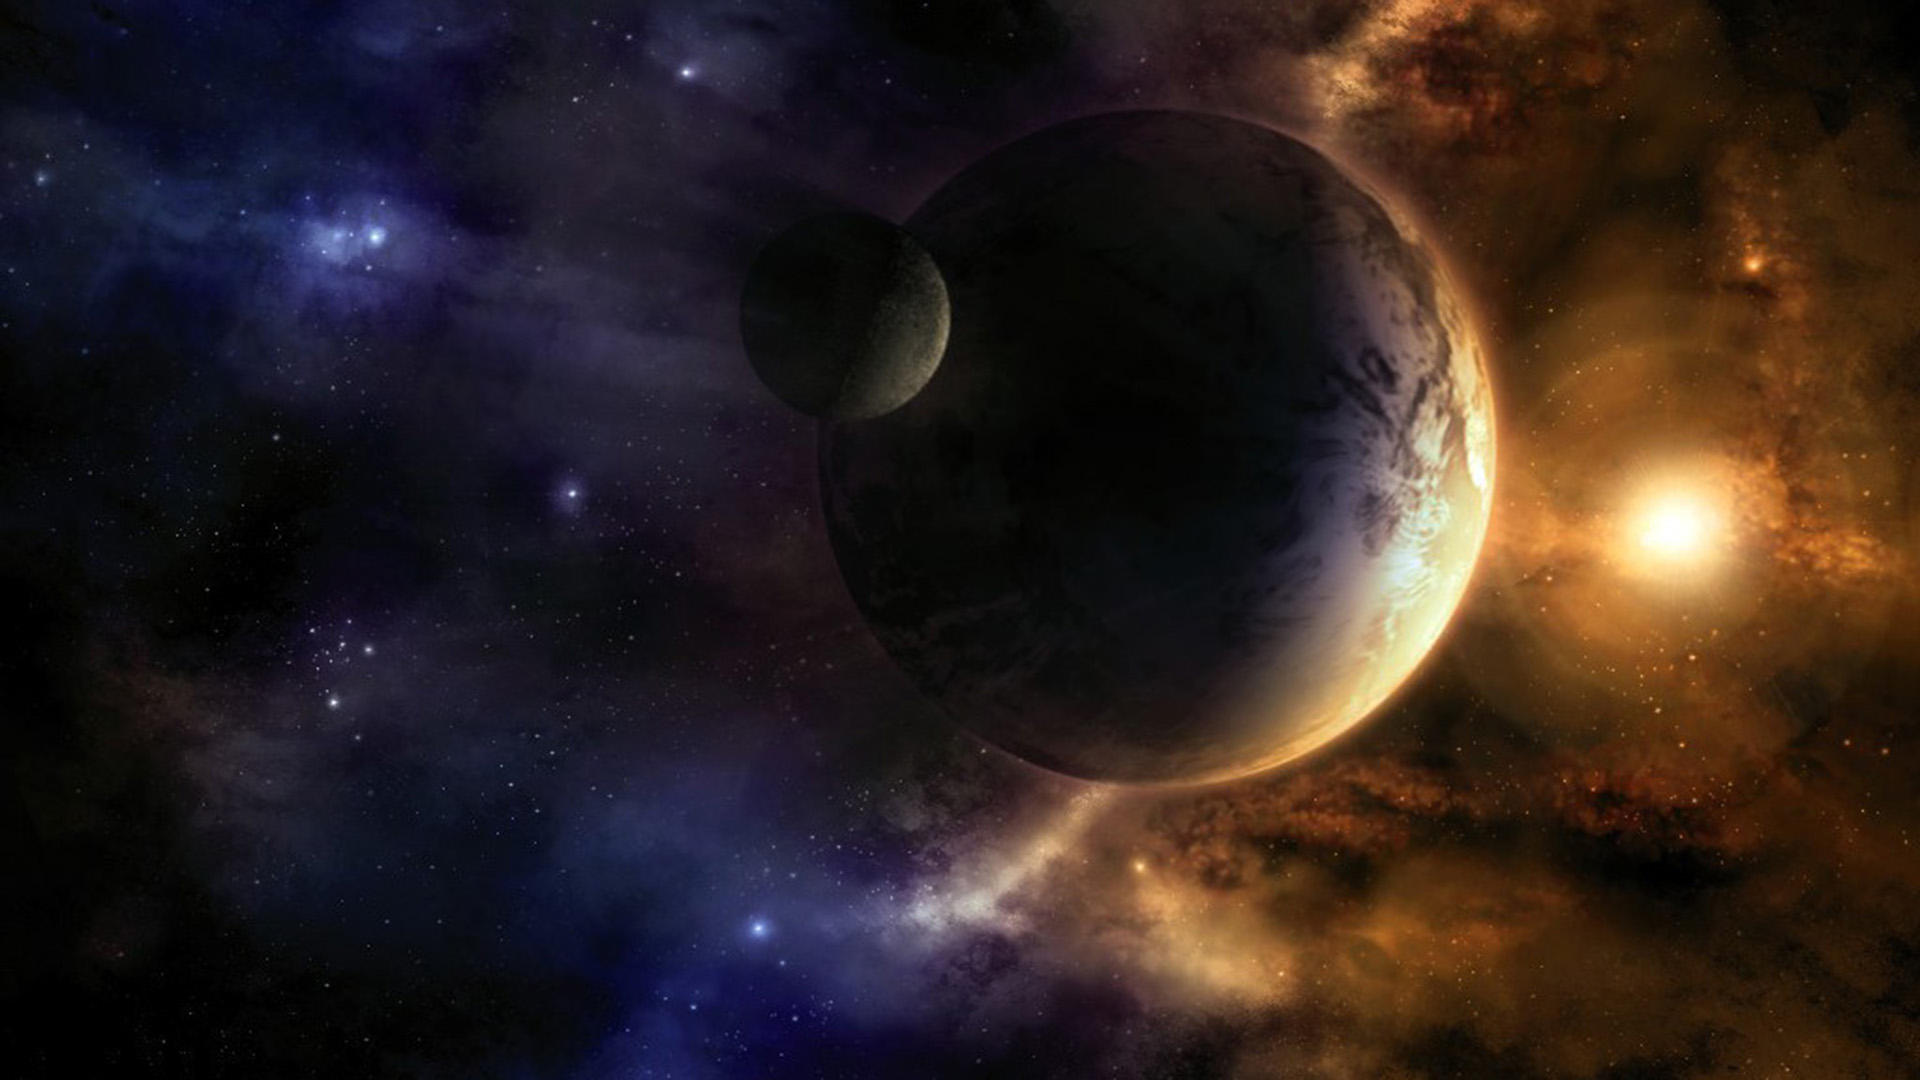 33 Free HD Universe Backgrounds For Desktops Laptops and